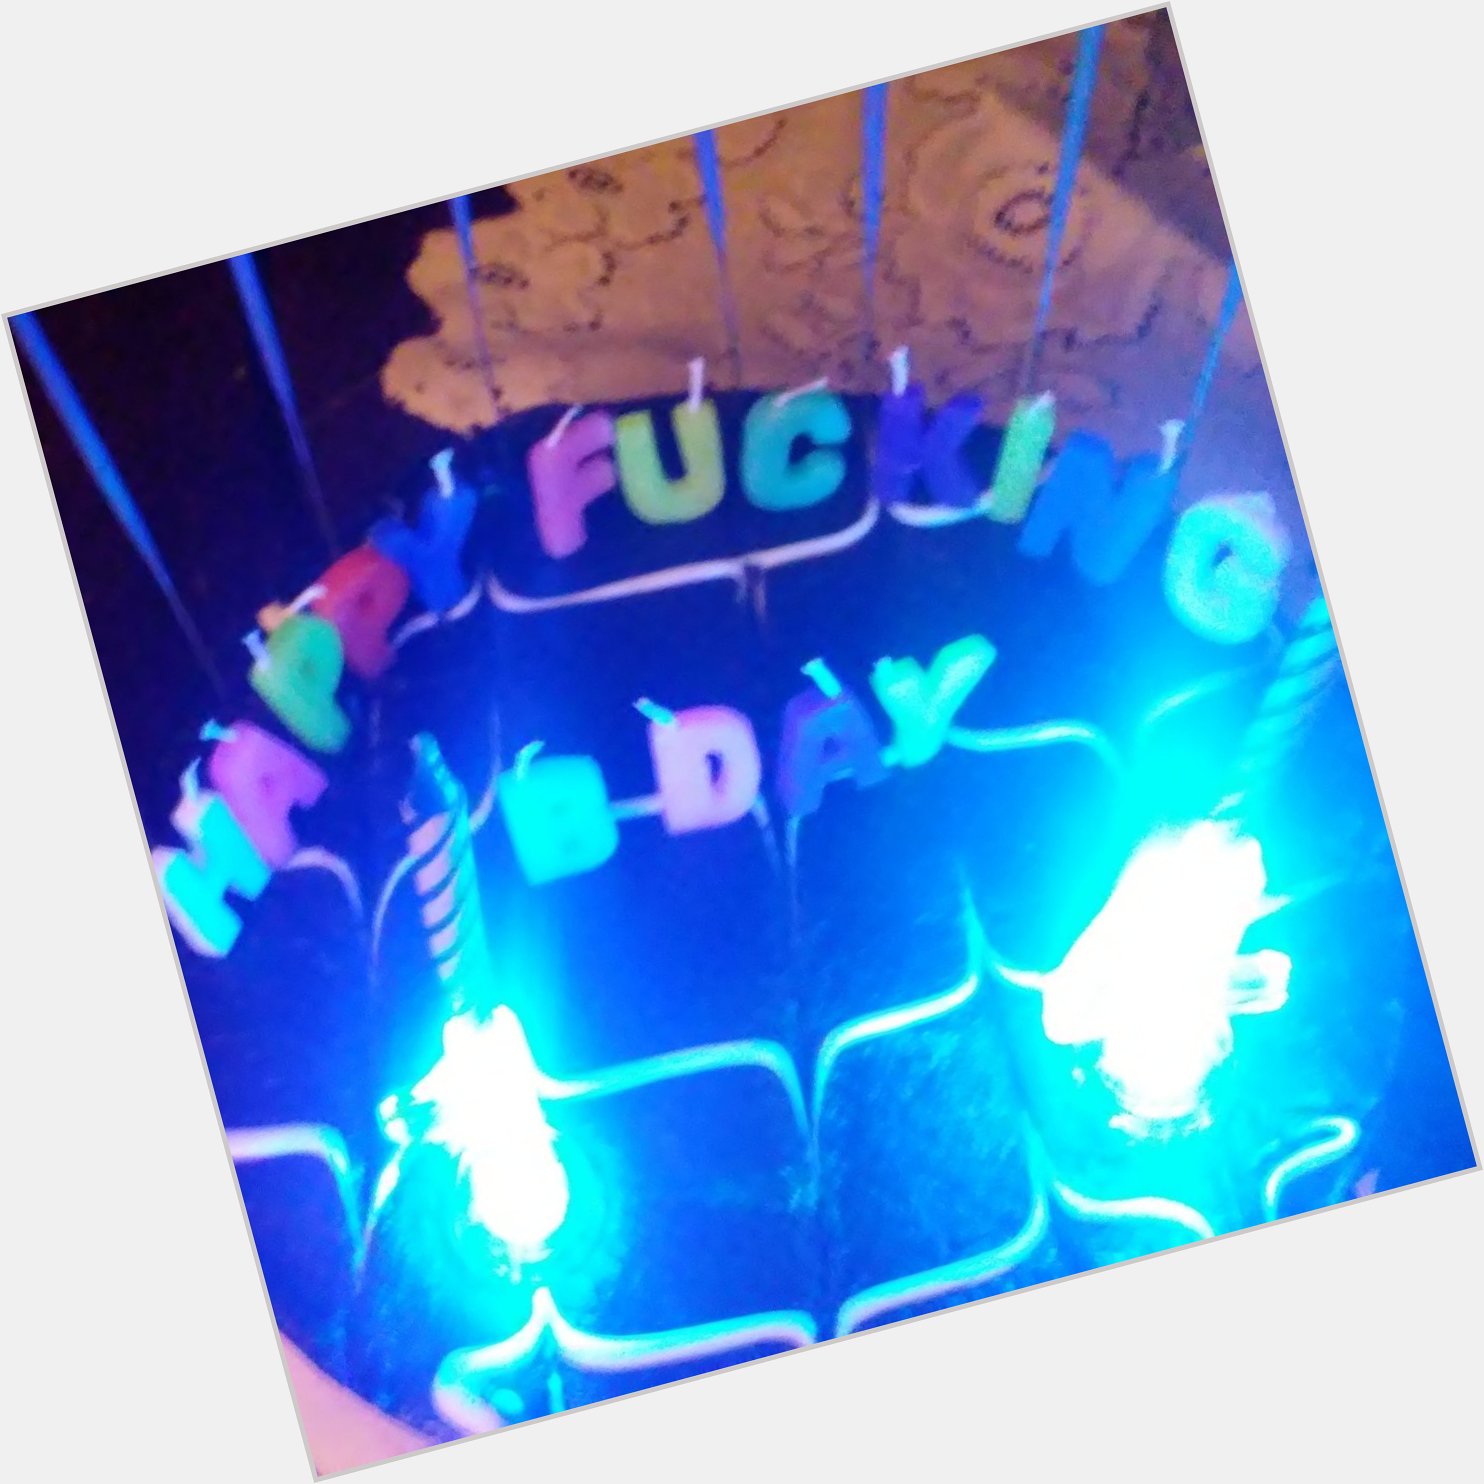 Inappropriate but funny! He loved it and took a pic of his cake. Happy birthday Bob, love you little man! 